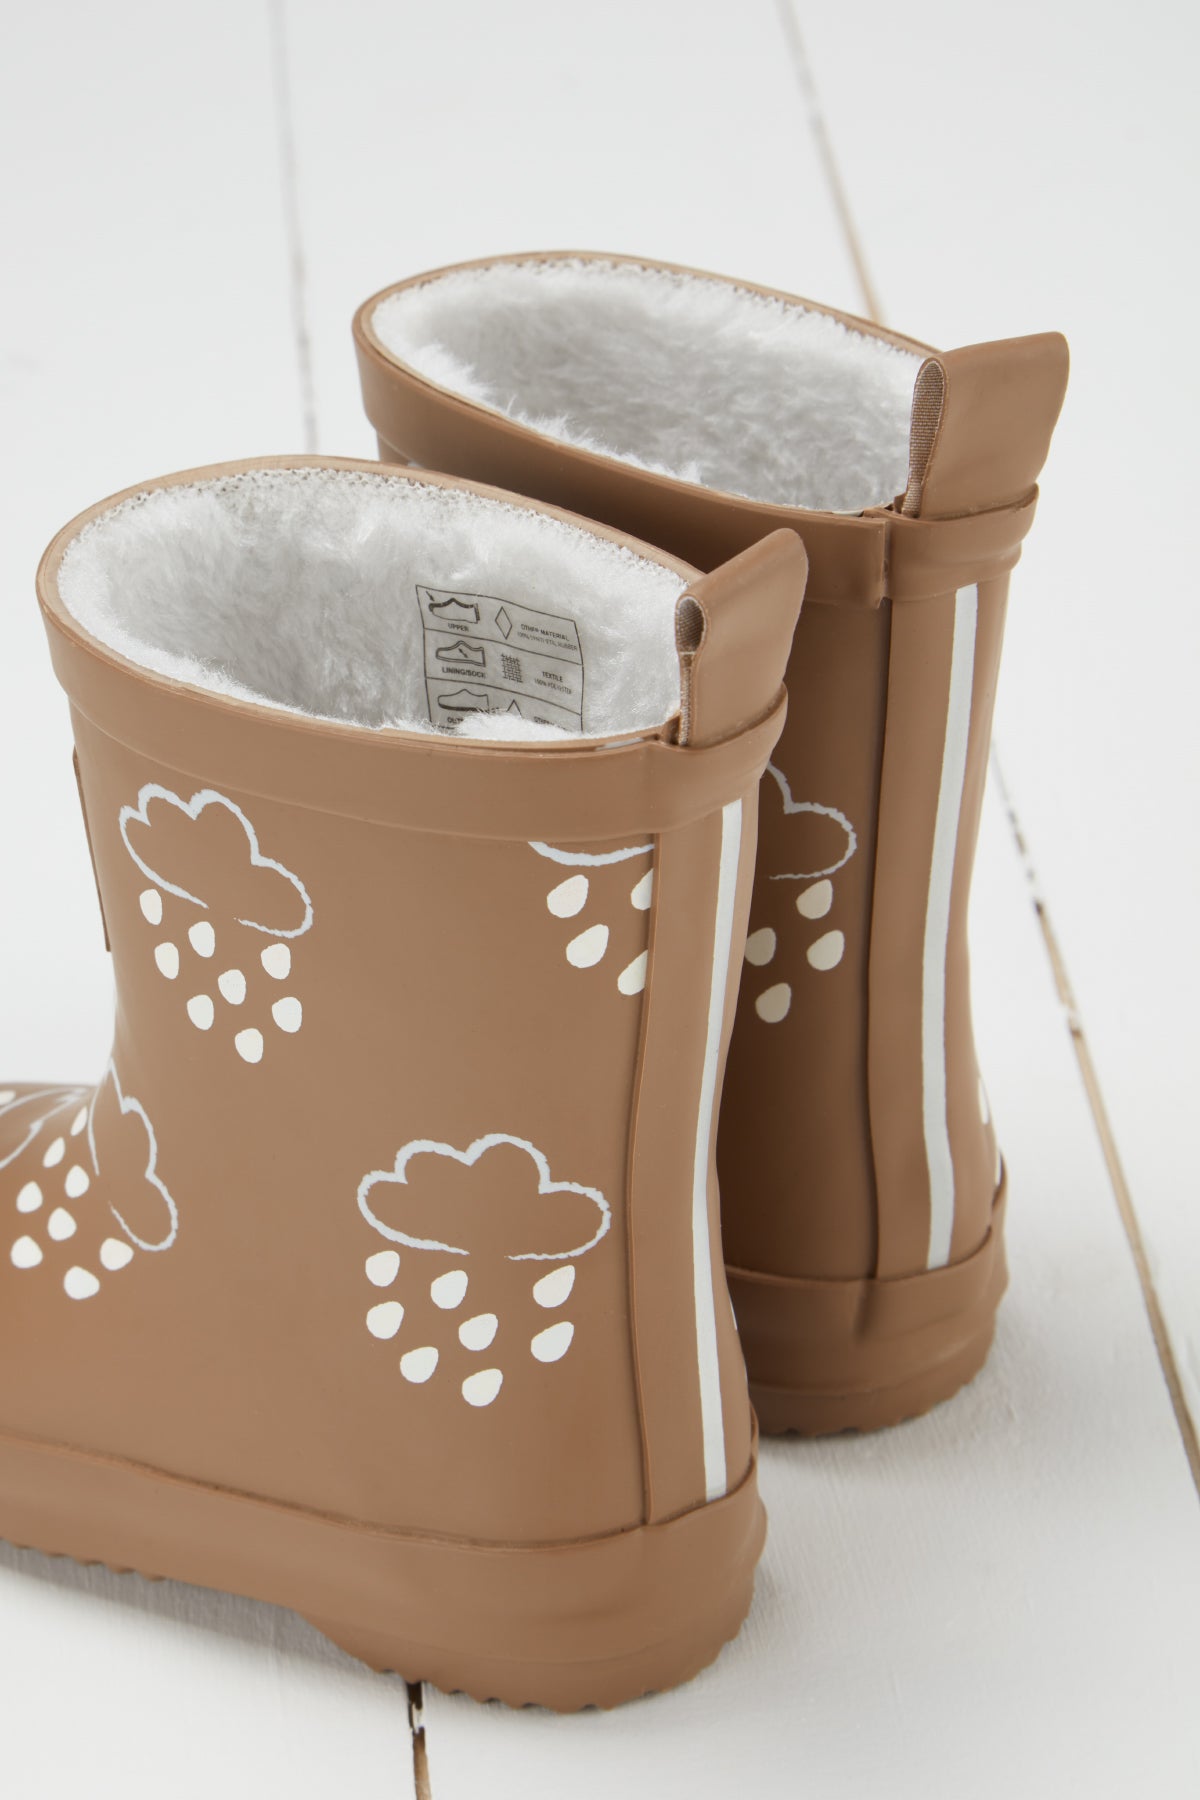 Changing Kids Wellies (Boots) - Fudge Brown Colour